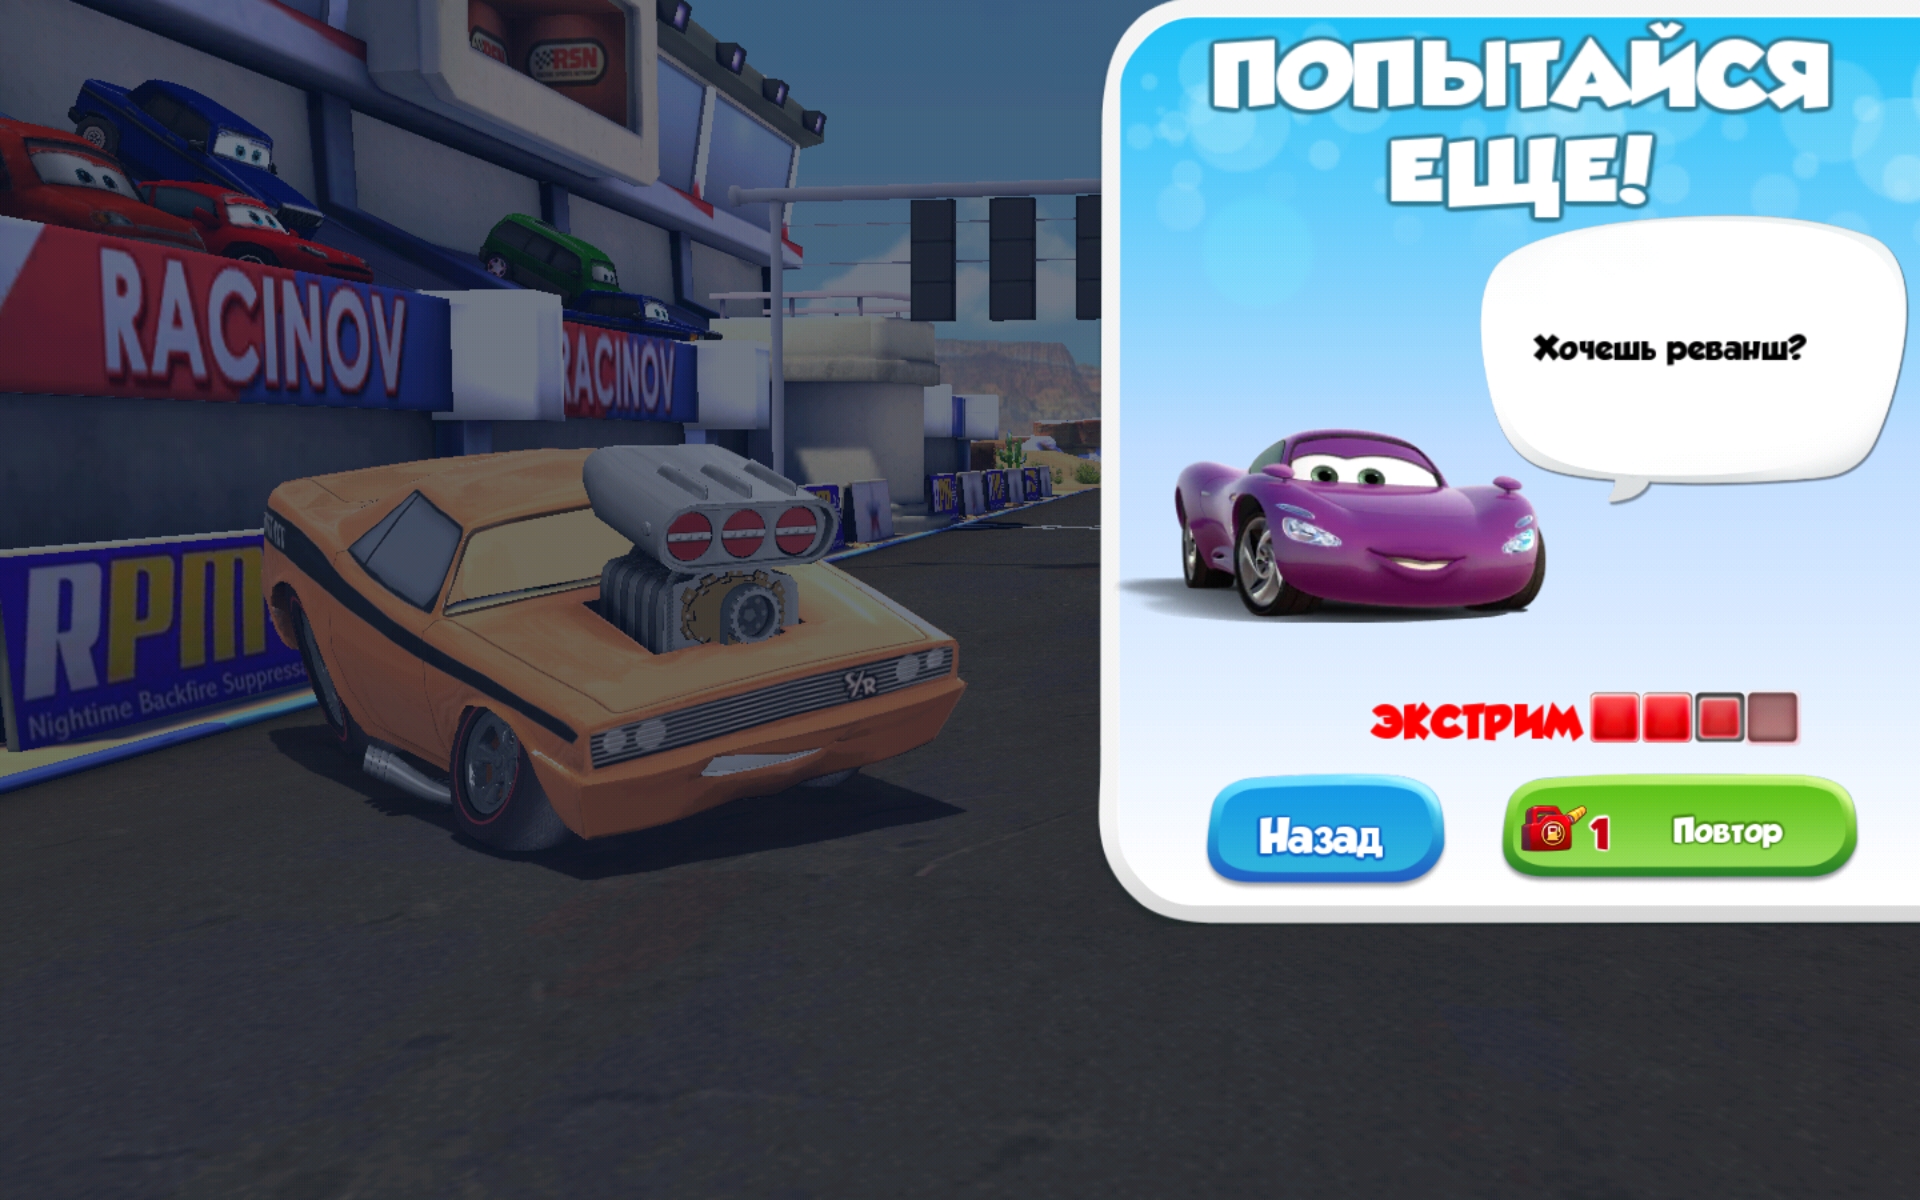 Cars: Fast as Lightning para iPhone - Download